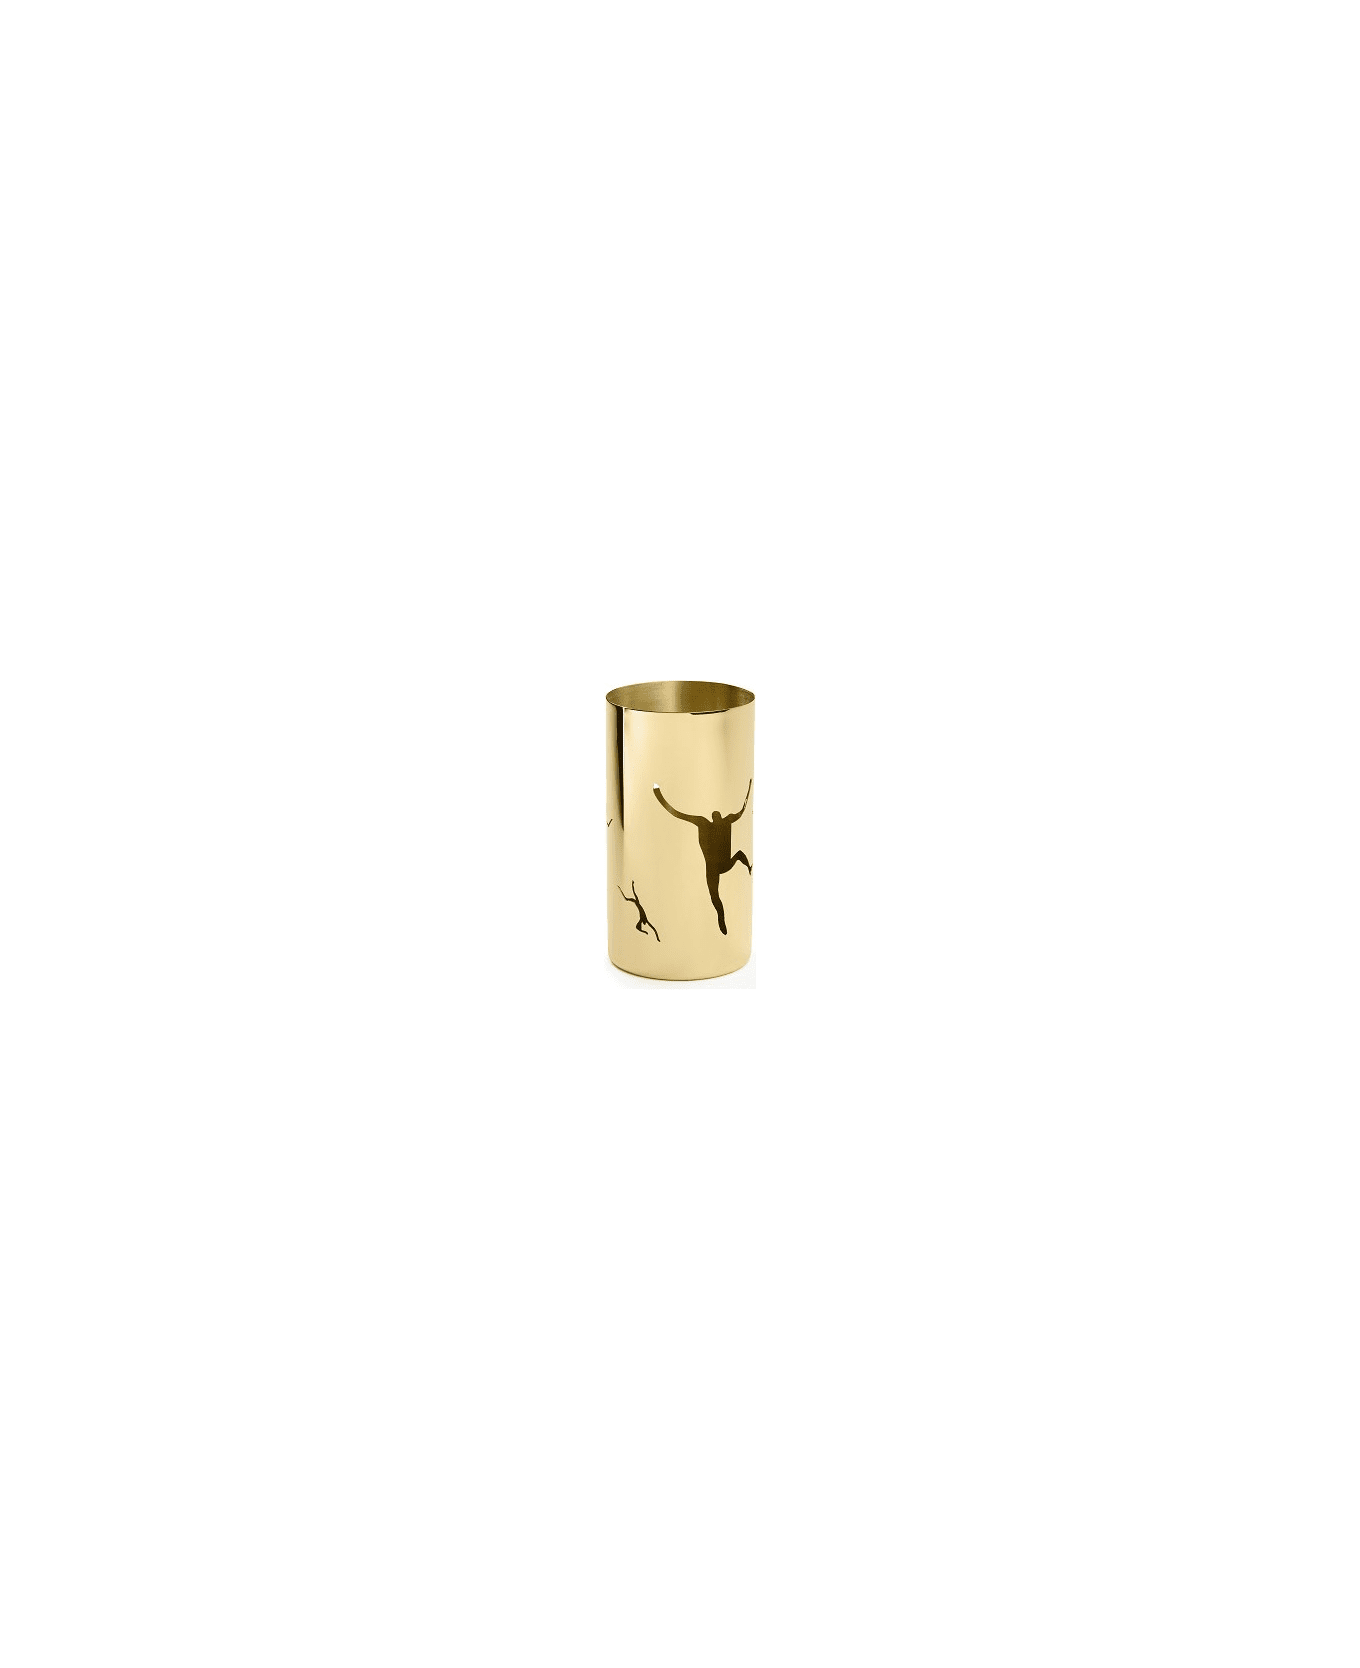 Ghidini 1961 Cylinder Bowl Polished Brass - Polished brass お皿＆ボウル